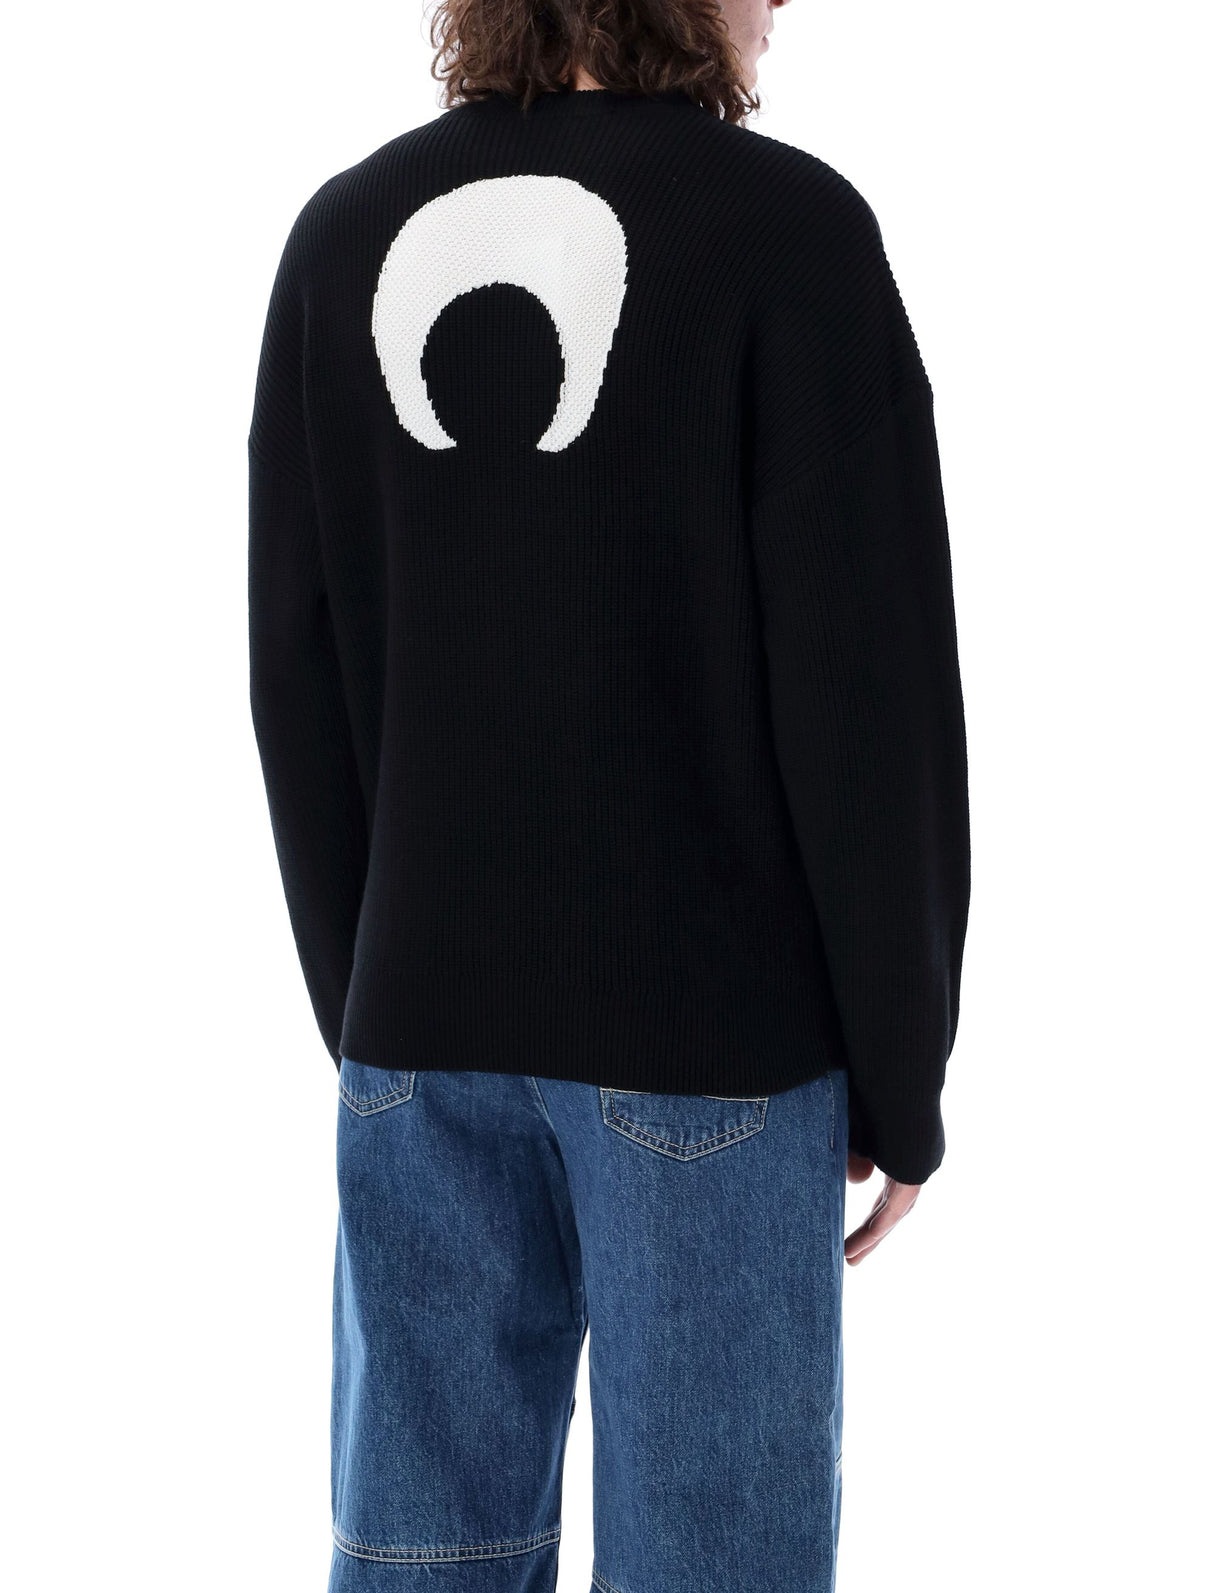 Men's Cotton Knit Sweater with Moon Logo by Marine Serre